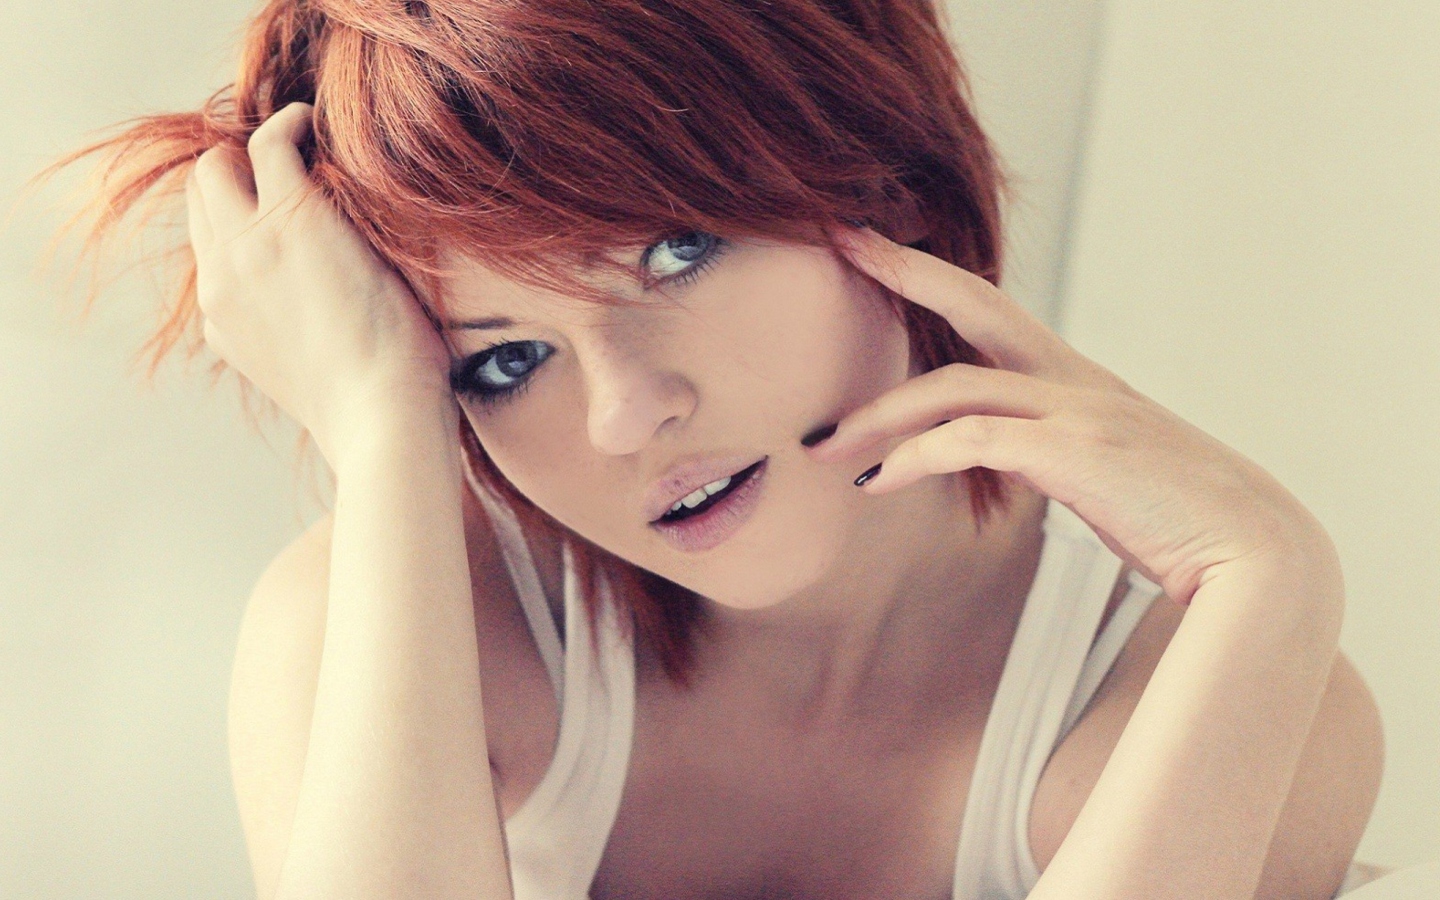 Redhead In White Top wallpaper 1440x900